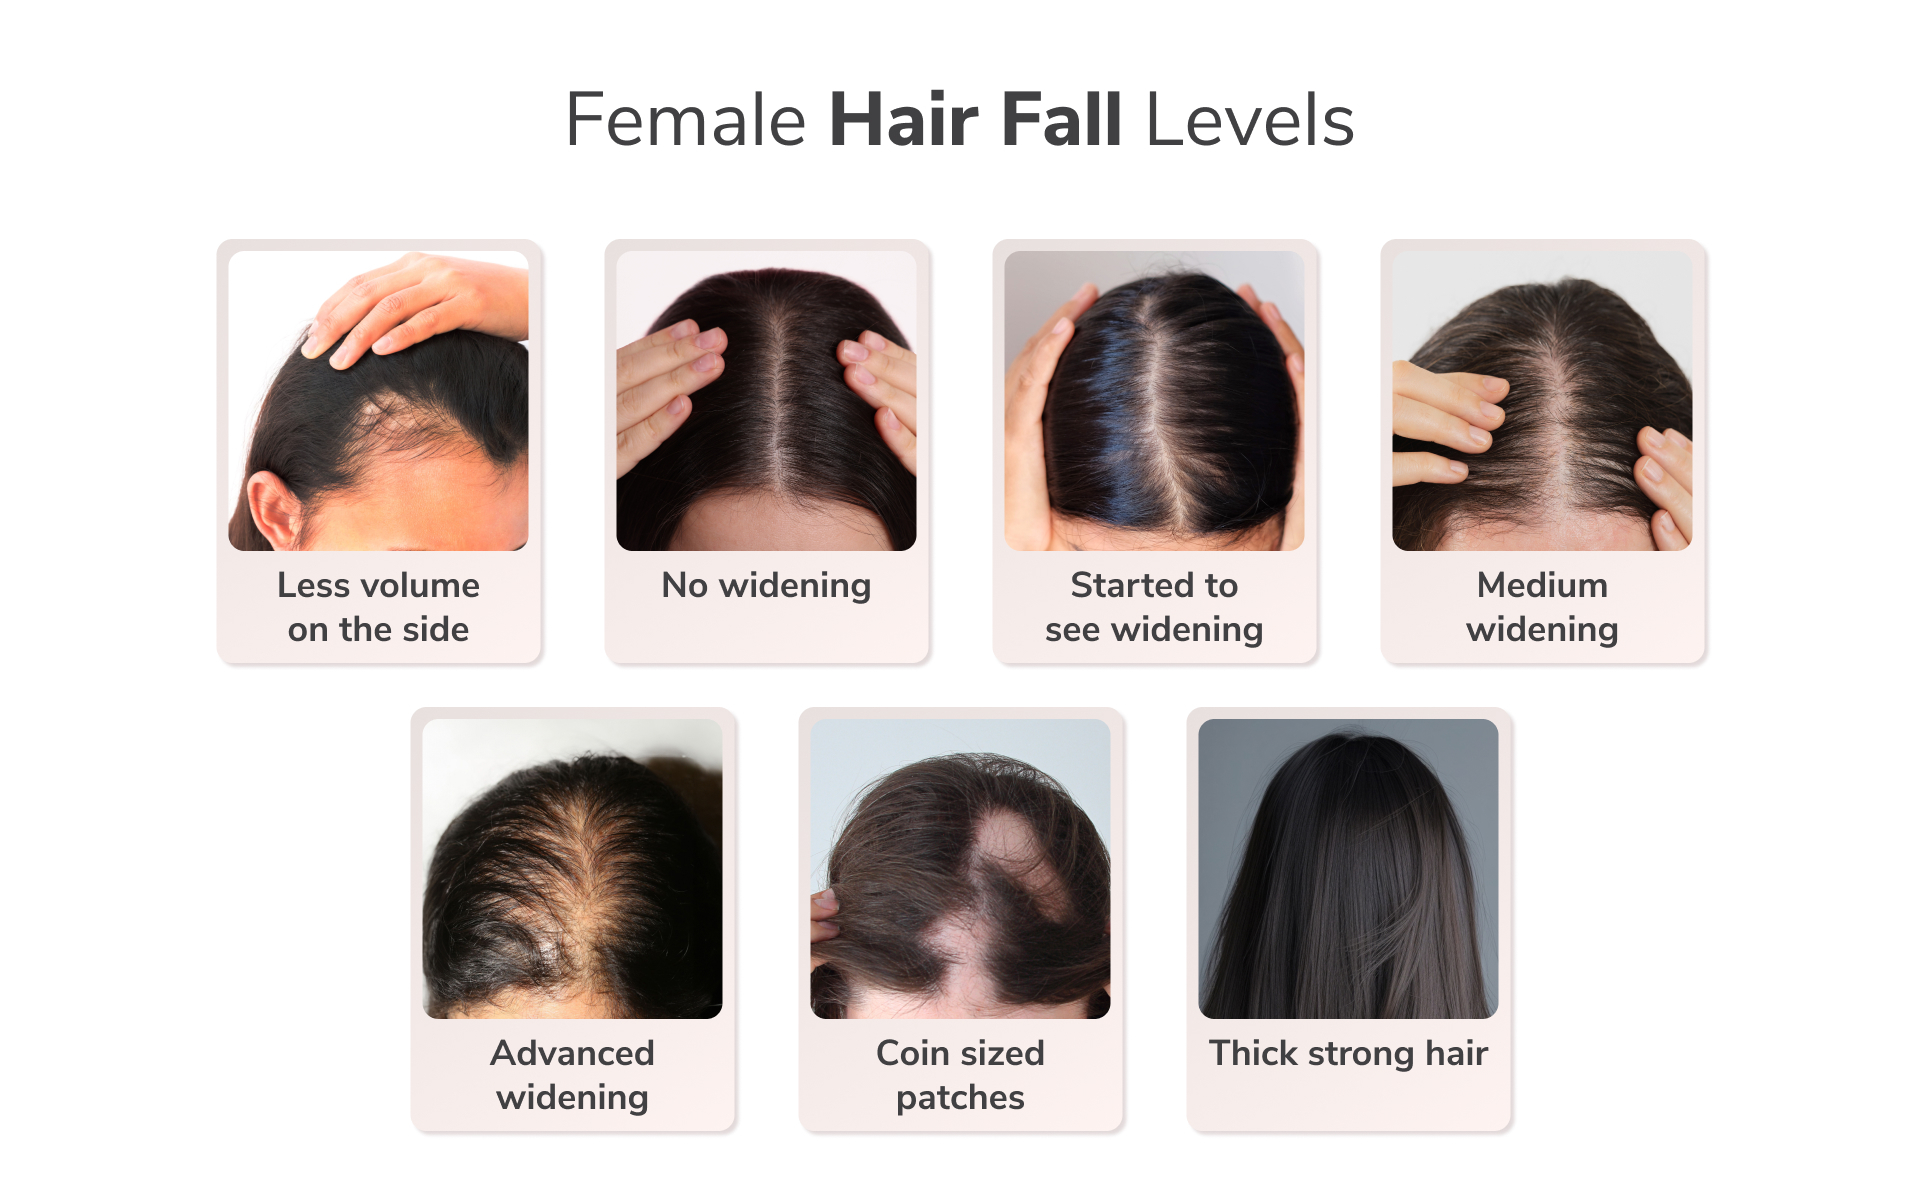 Traya’s Study Reveals a Concerning Finding: One in Two Women Aged 36-40 Suffer from Advanced Widening or Female Pattern Hair Loss